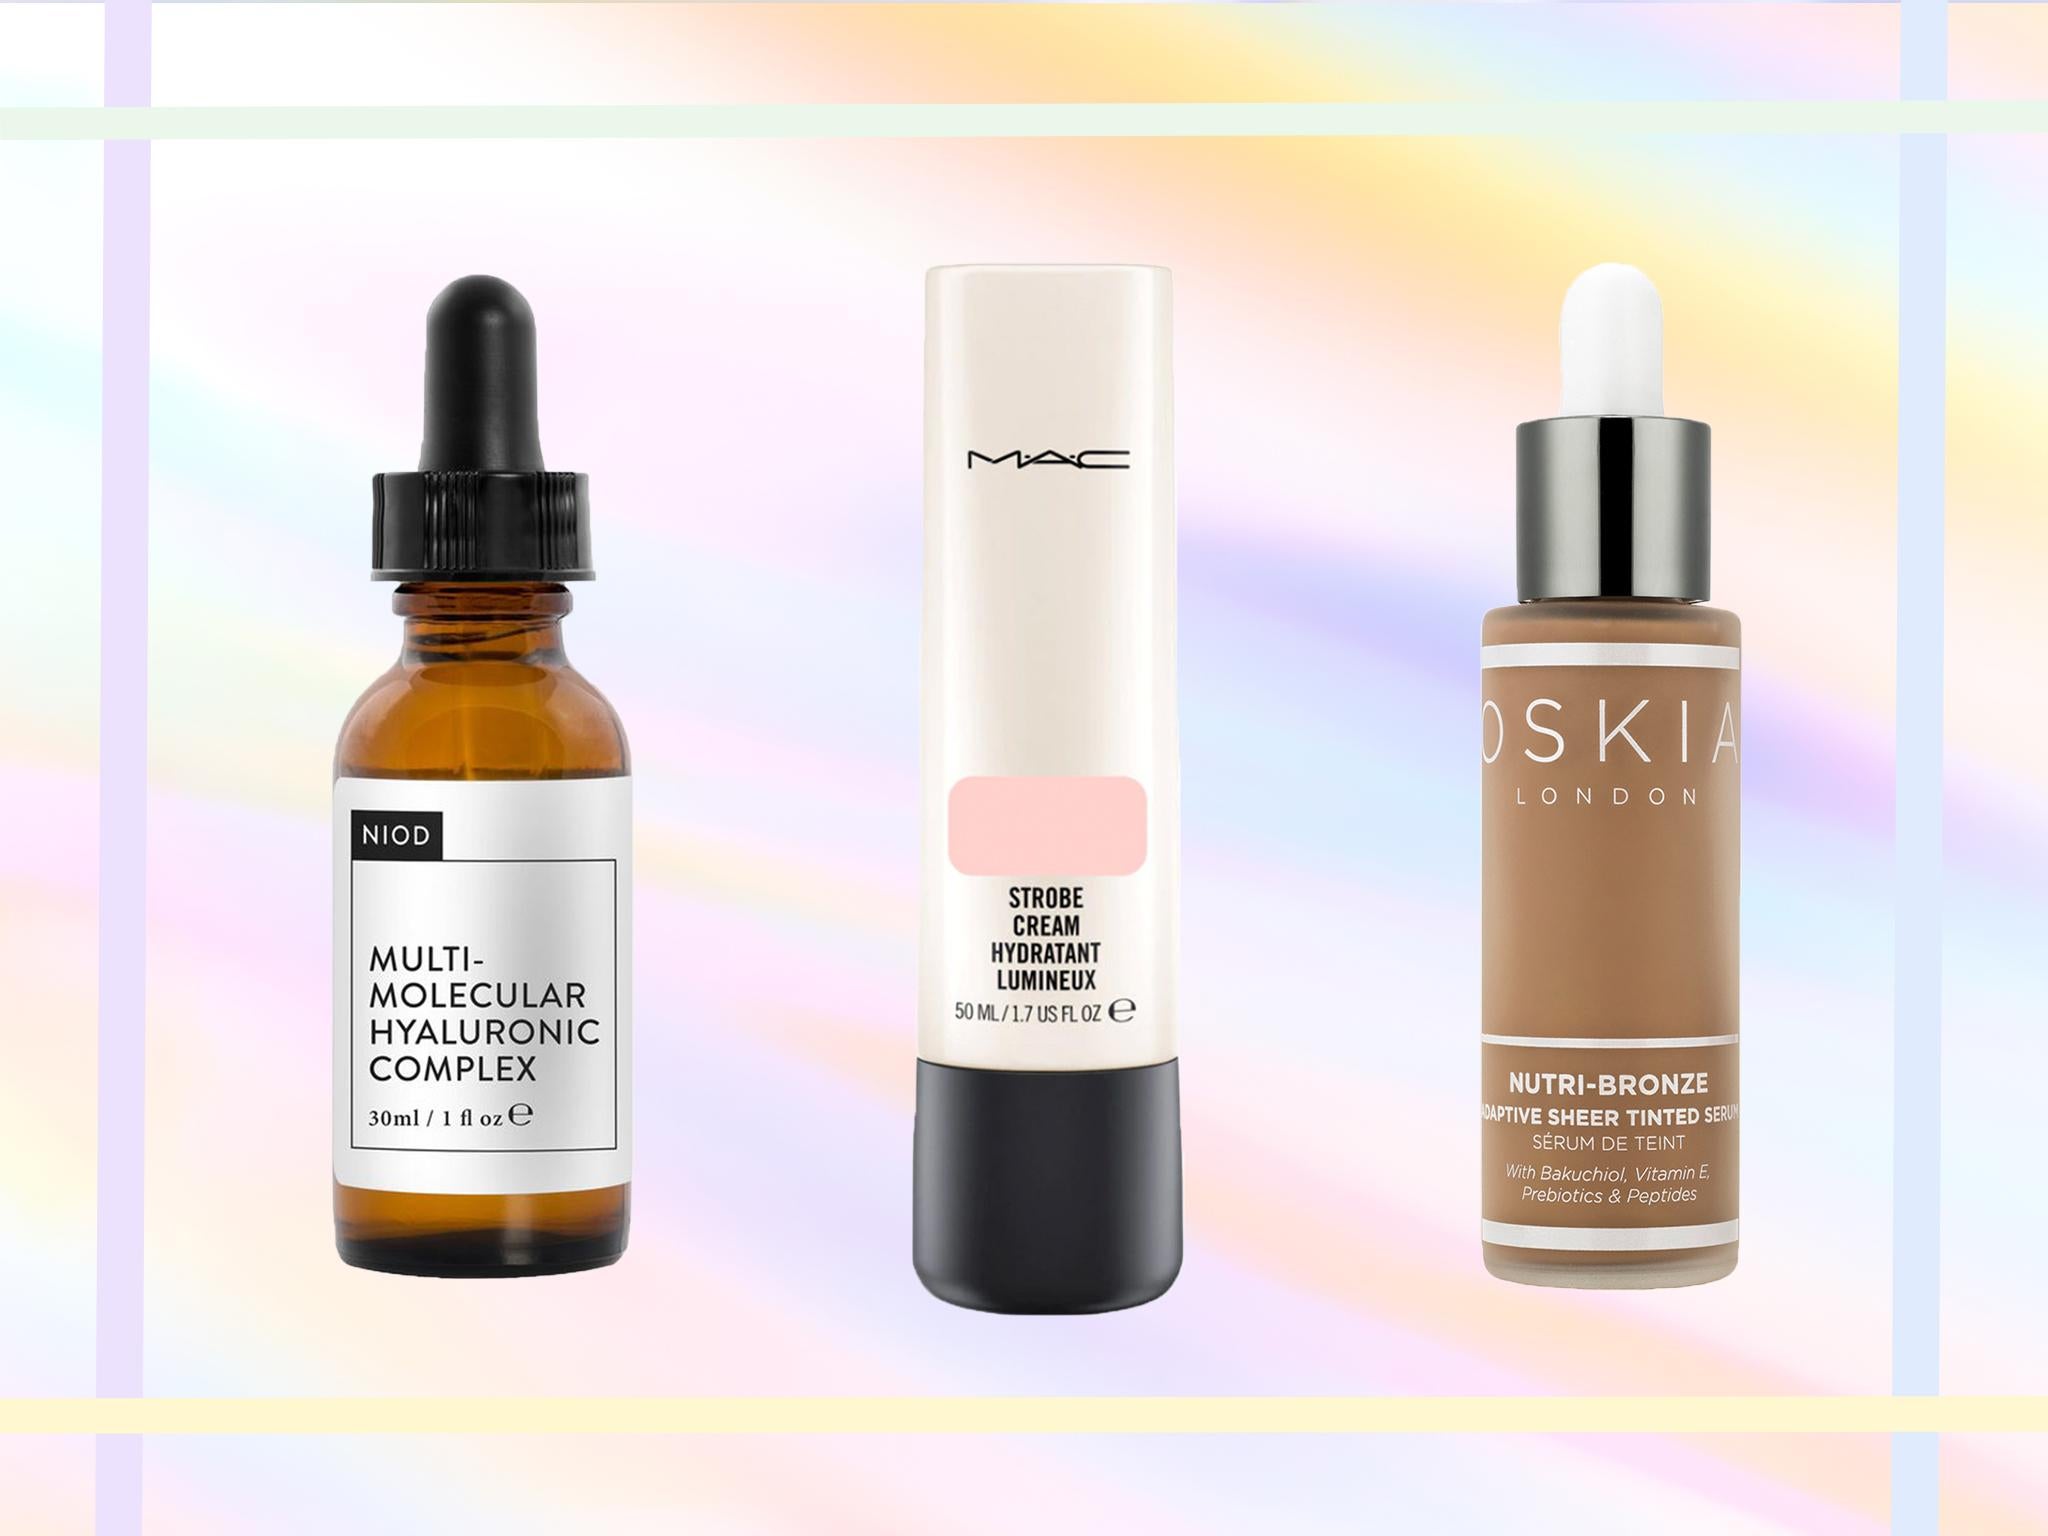 The change in seasons does not mean you have to succumb to dry, dull skin – simple additions like exfoliators, hydrating serums and glowy highlighters can make a world of difference